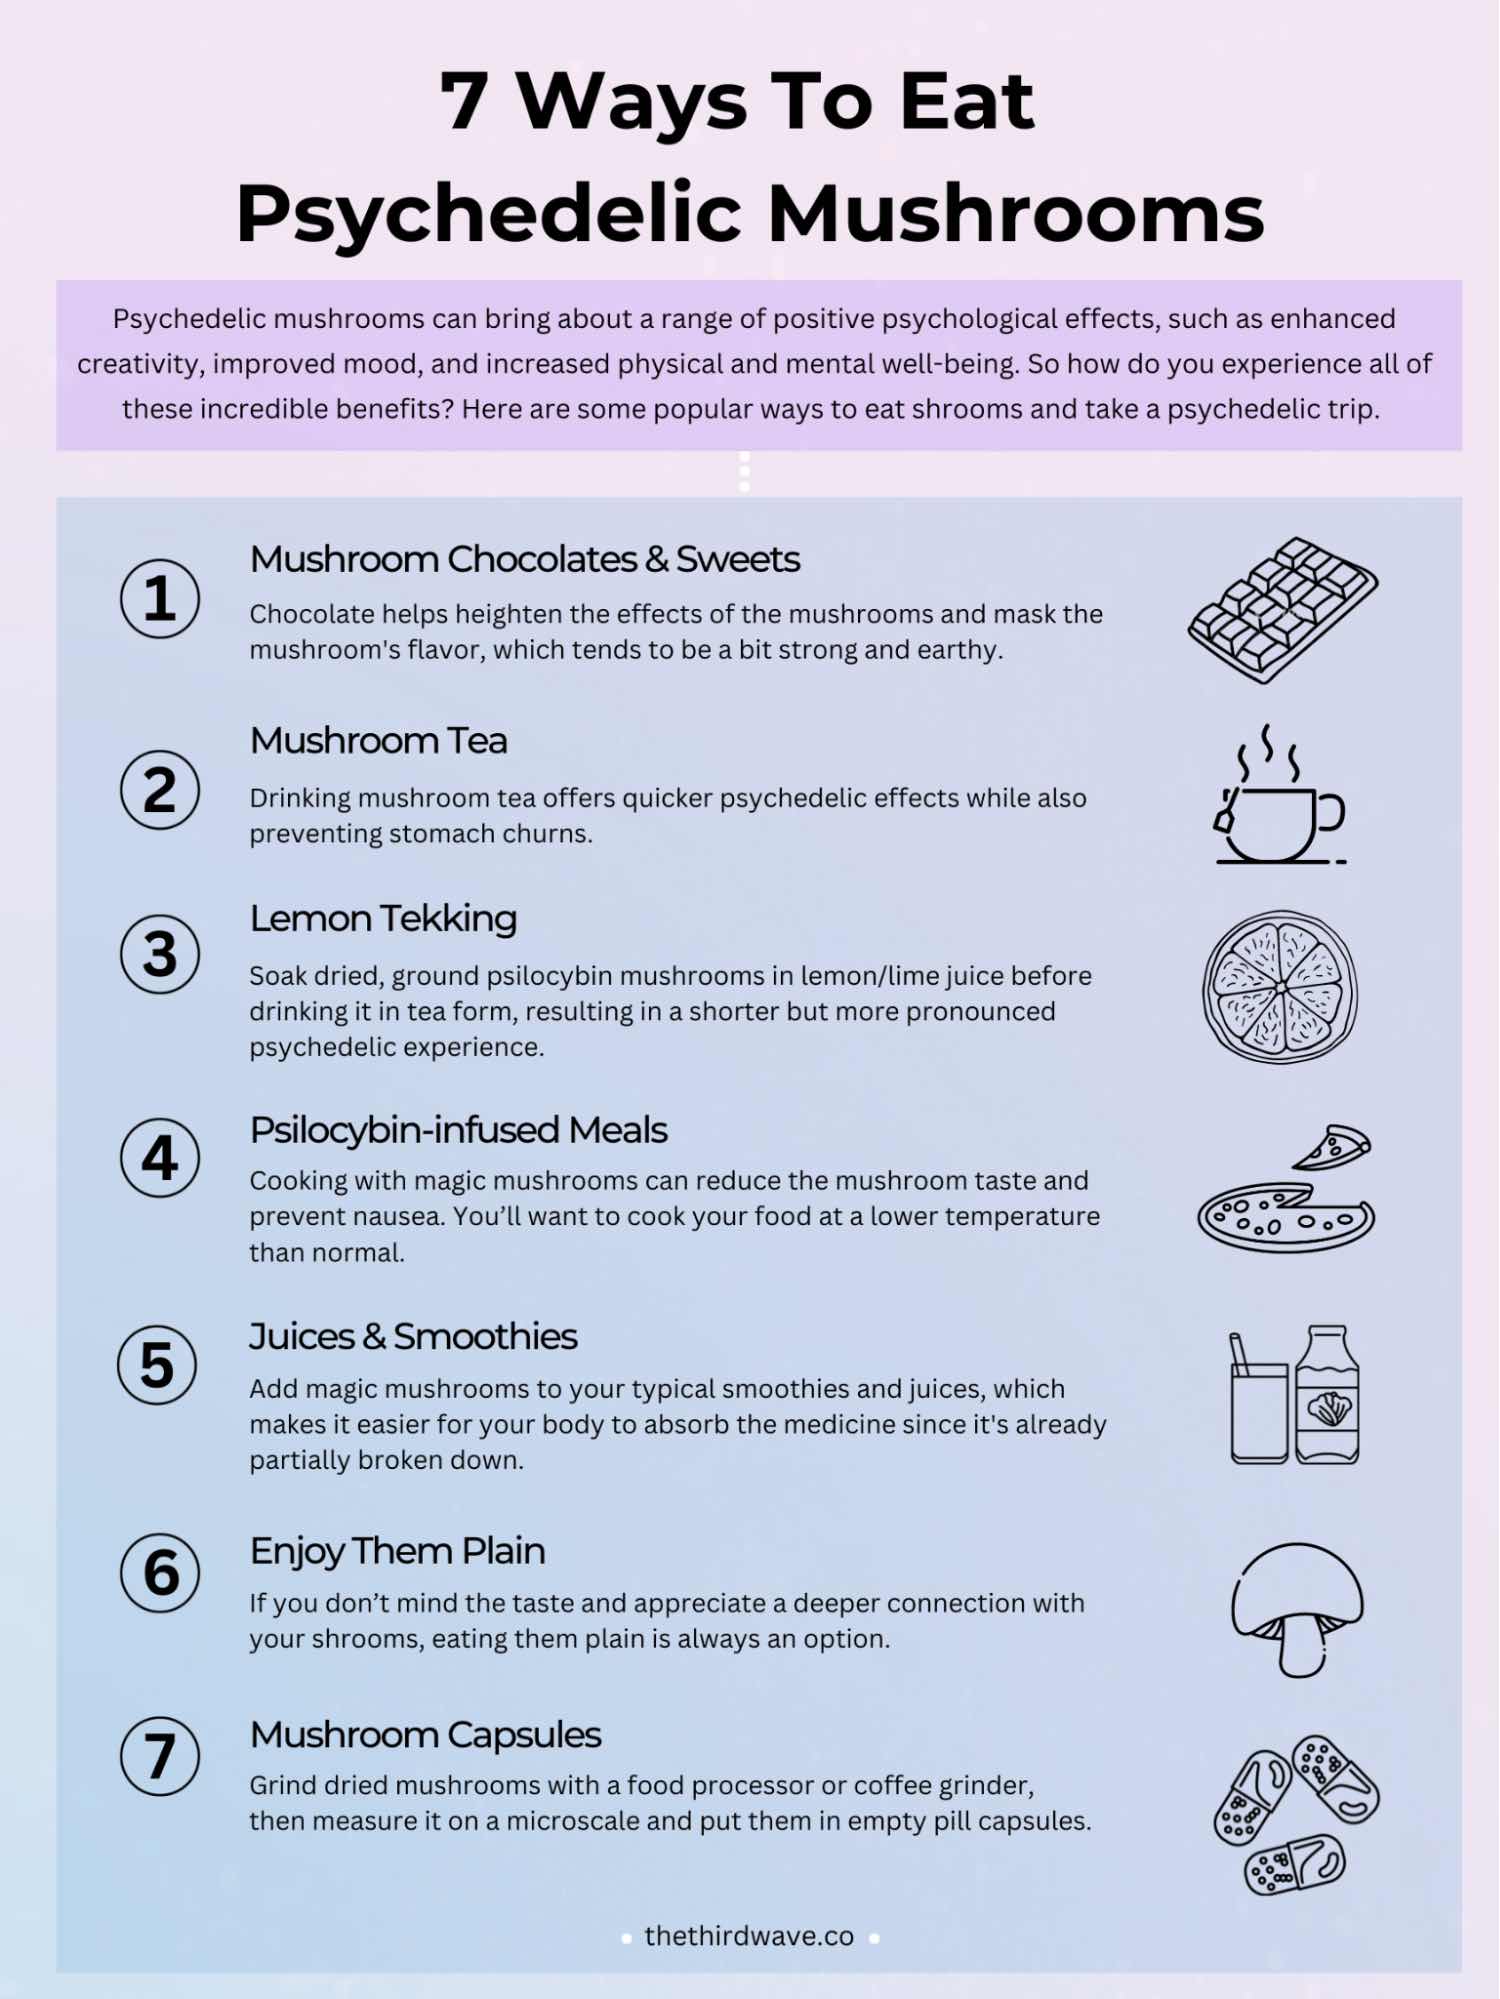 7 ways how to eat shrooms infographic